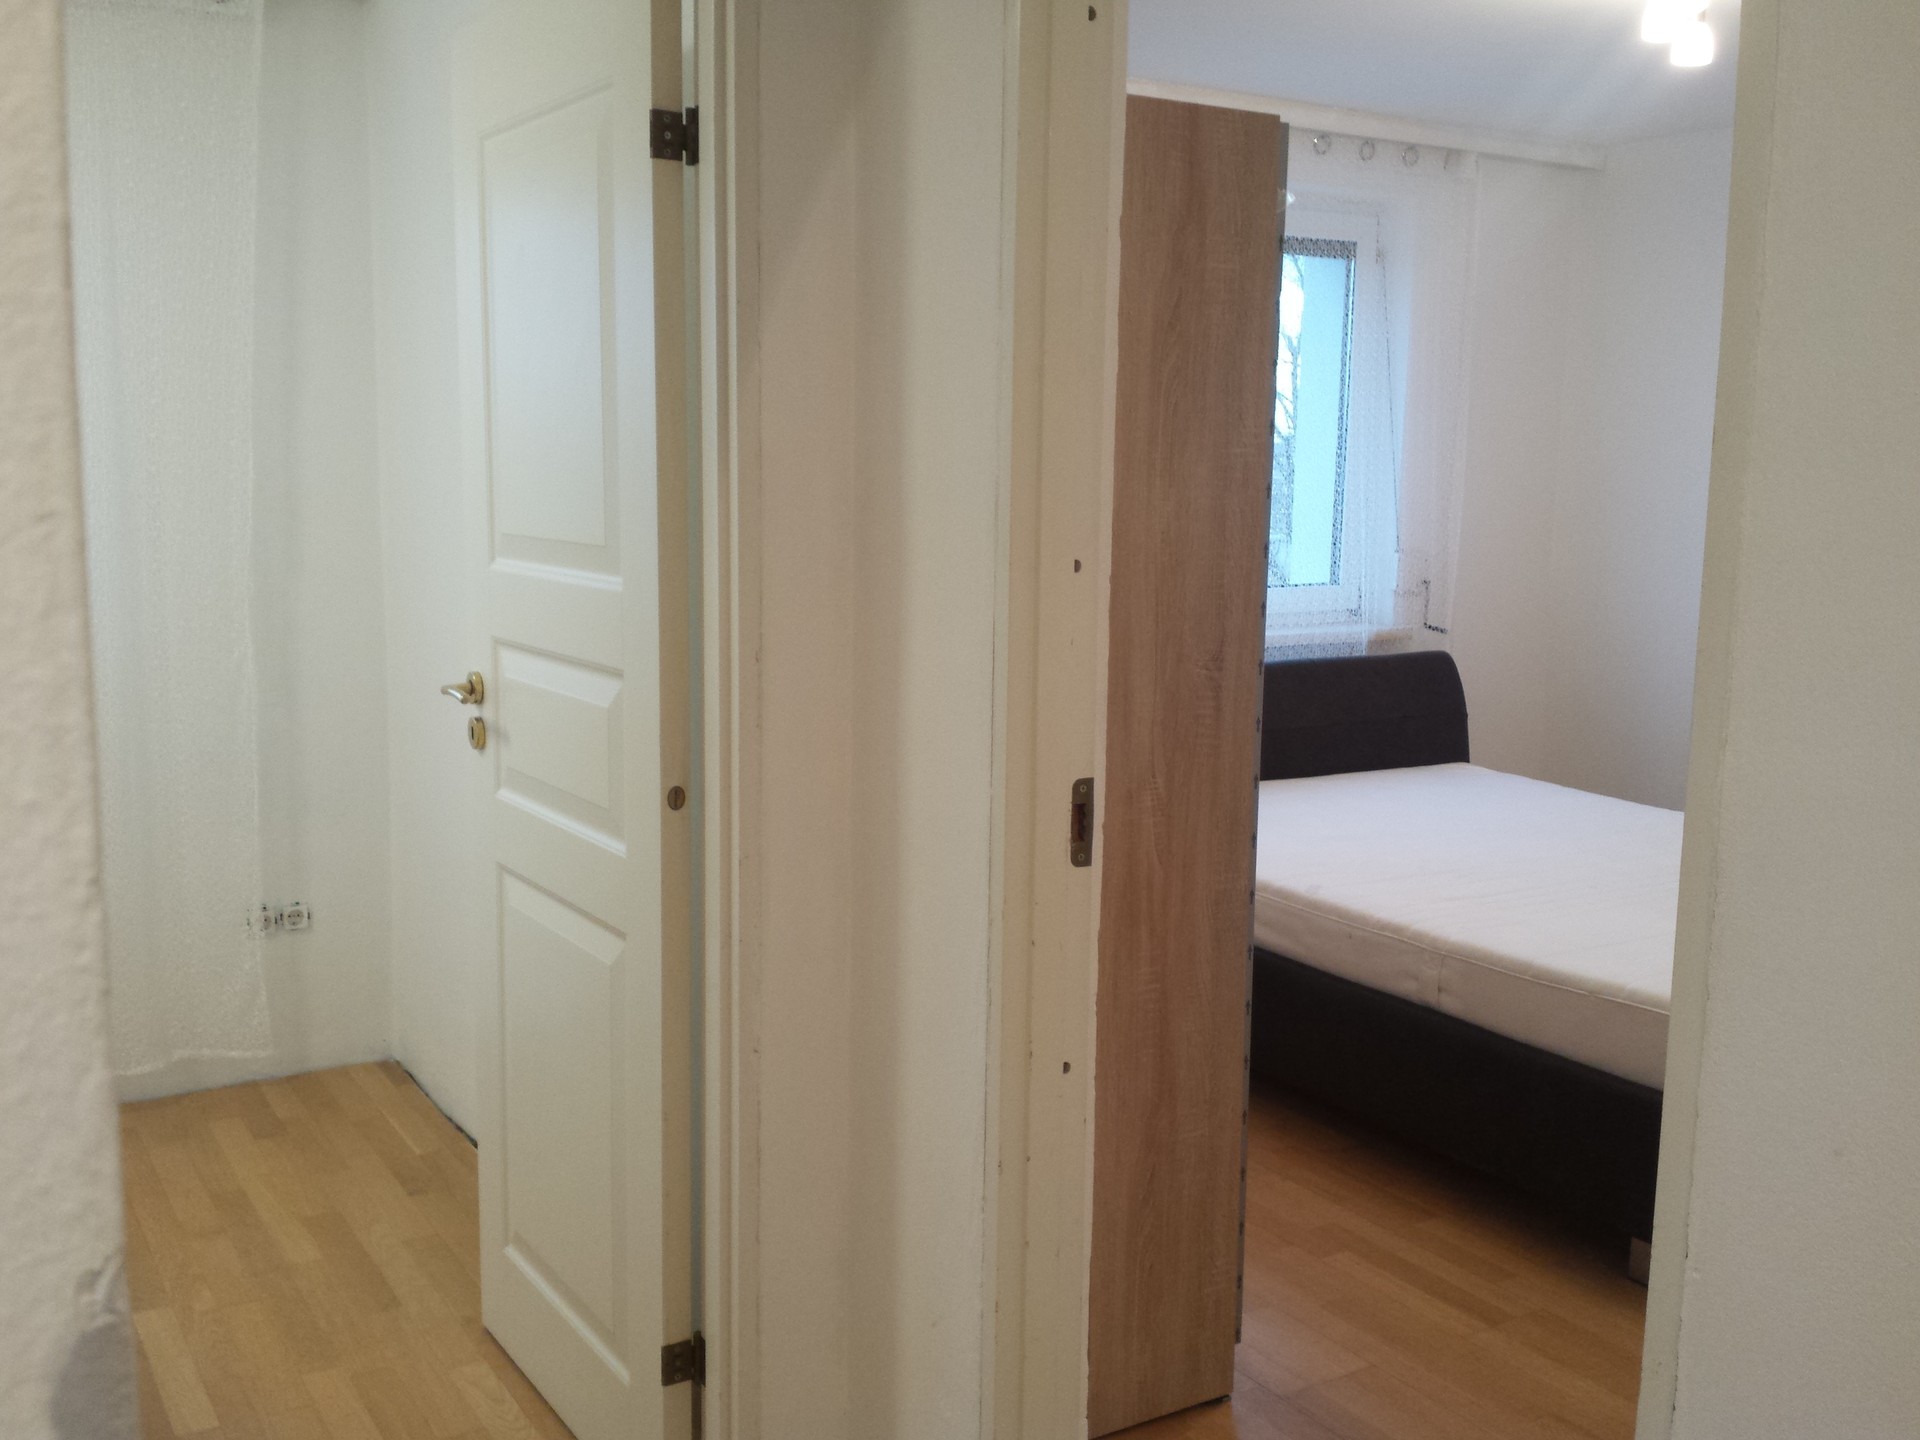 Comfortable two (2) bedroom apartment for rent in Zagreb (Students only) | apartment rentals in Zagreb 15